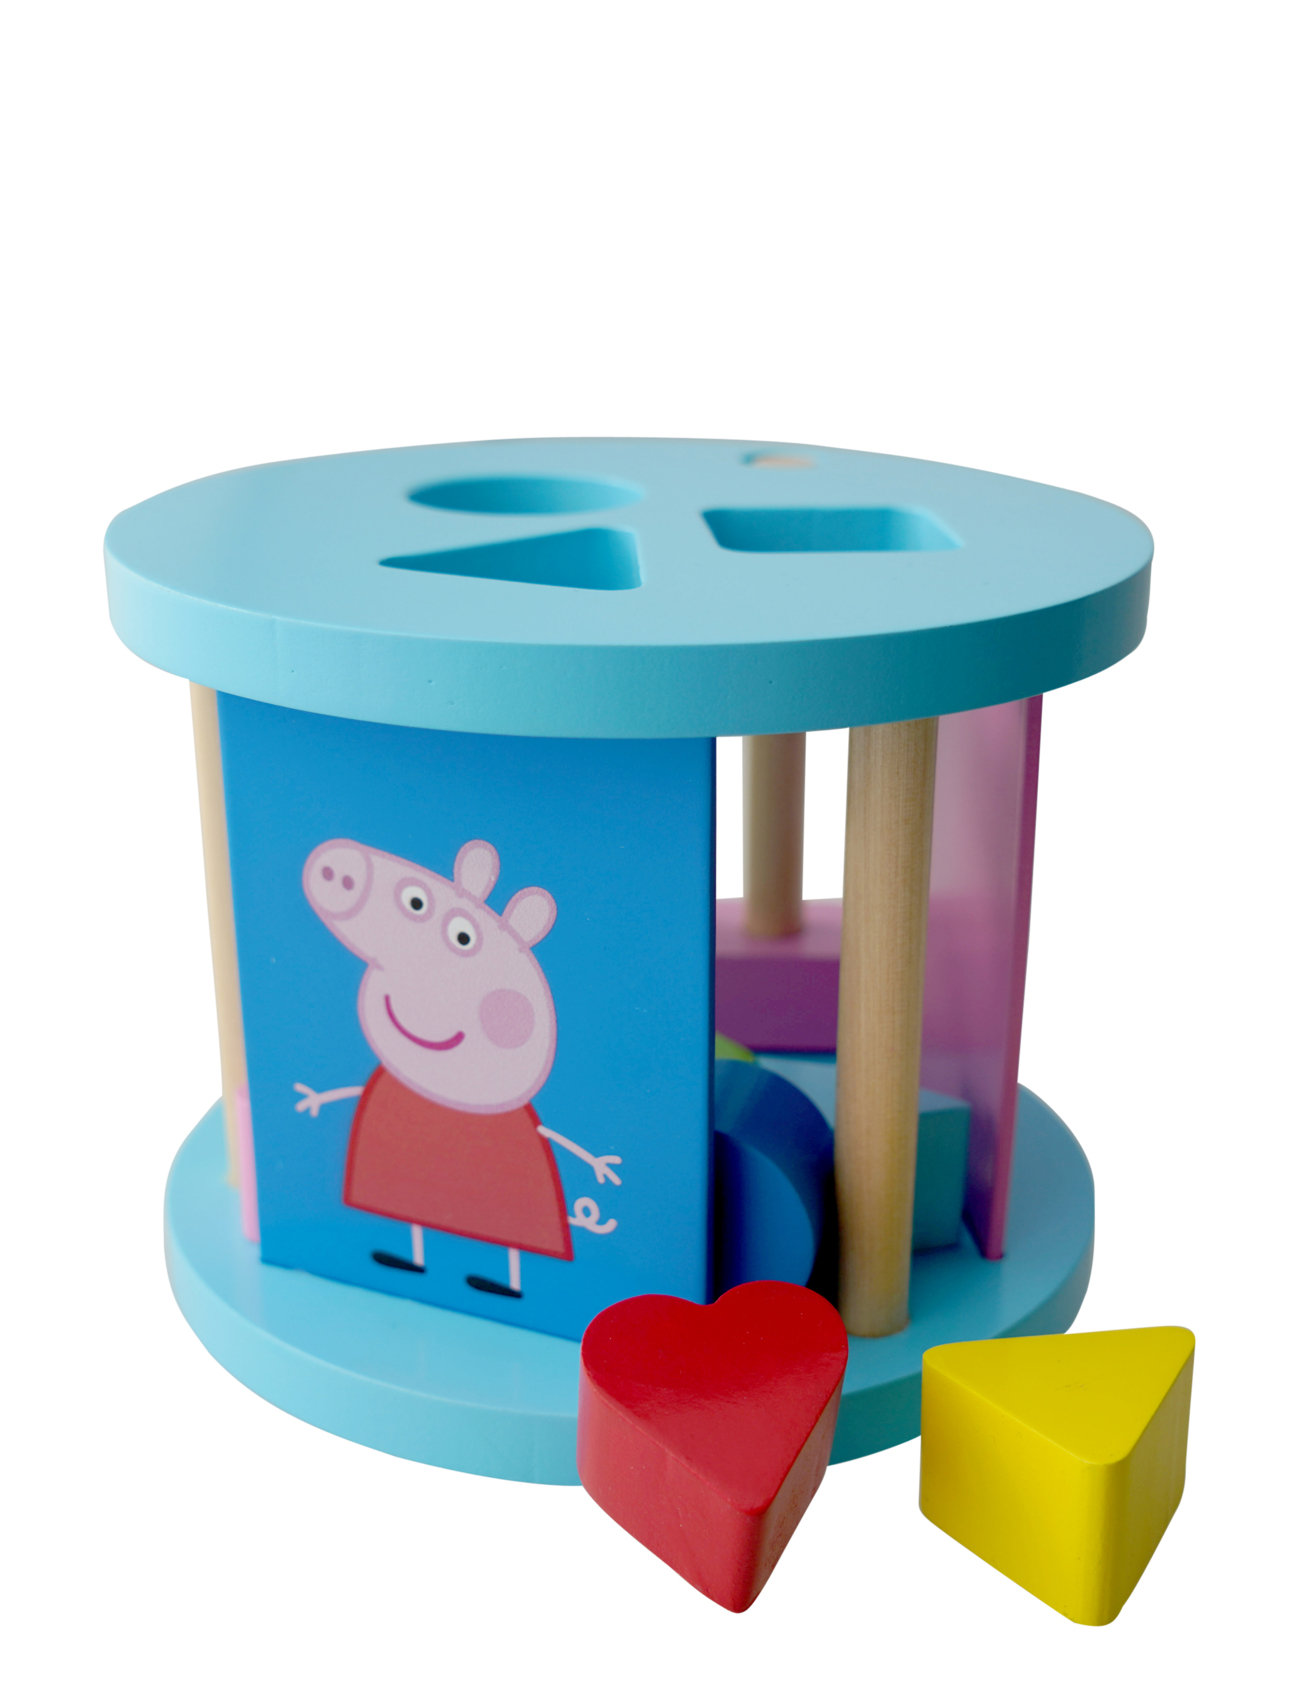 Peppa Pig Wooden Shape Sorter Toys Baby Toys Educational Toys Sorting Box Toy Multi/patterned Gurli Gris